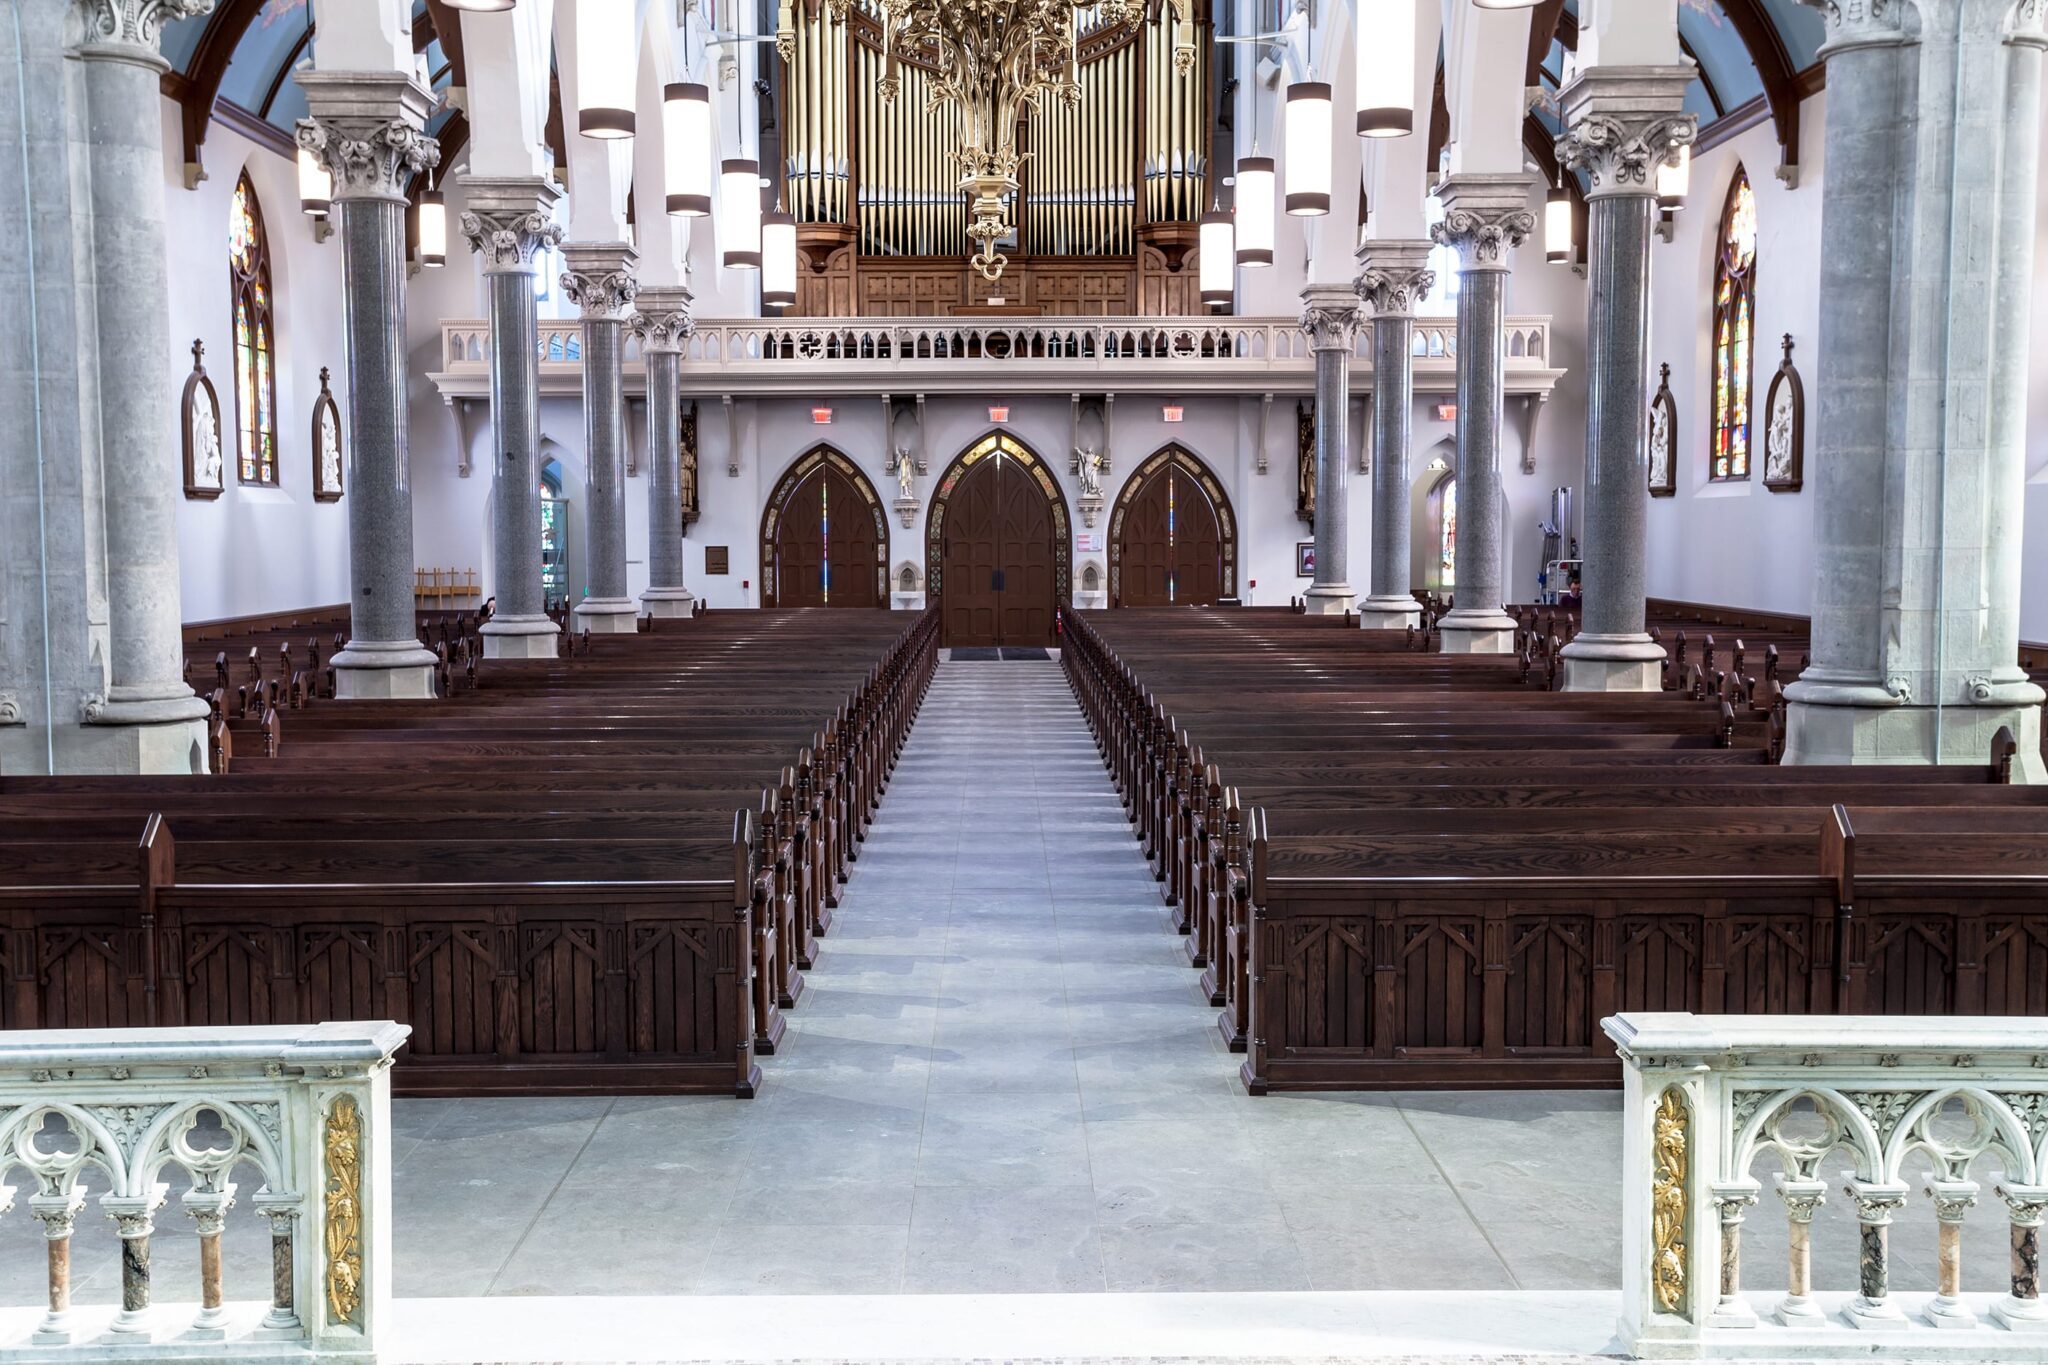 interior walkway with pews in rows